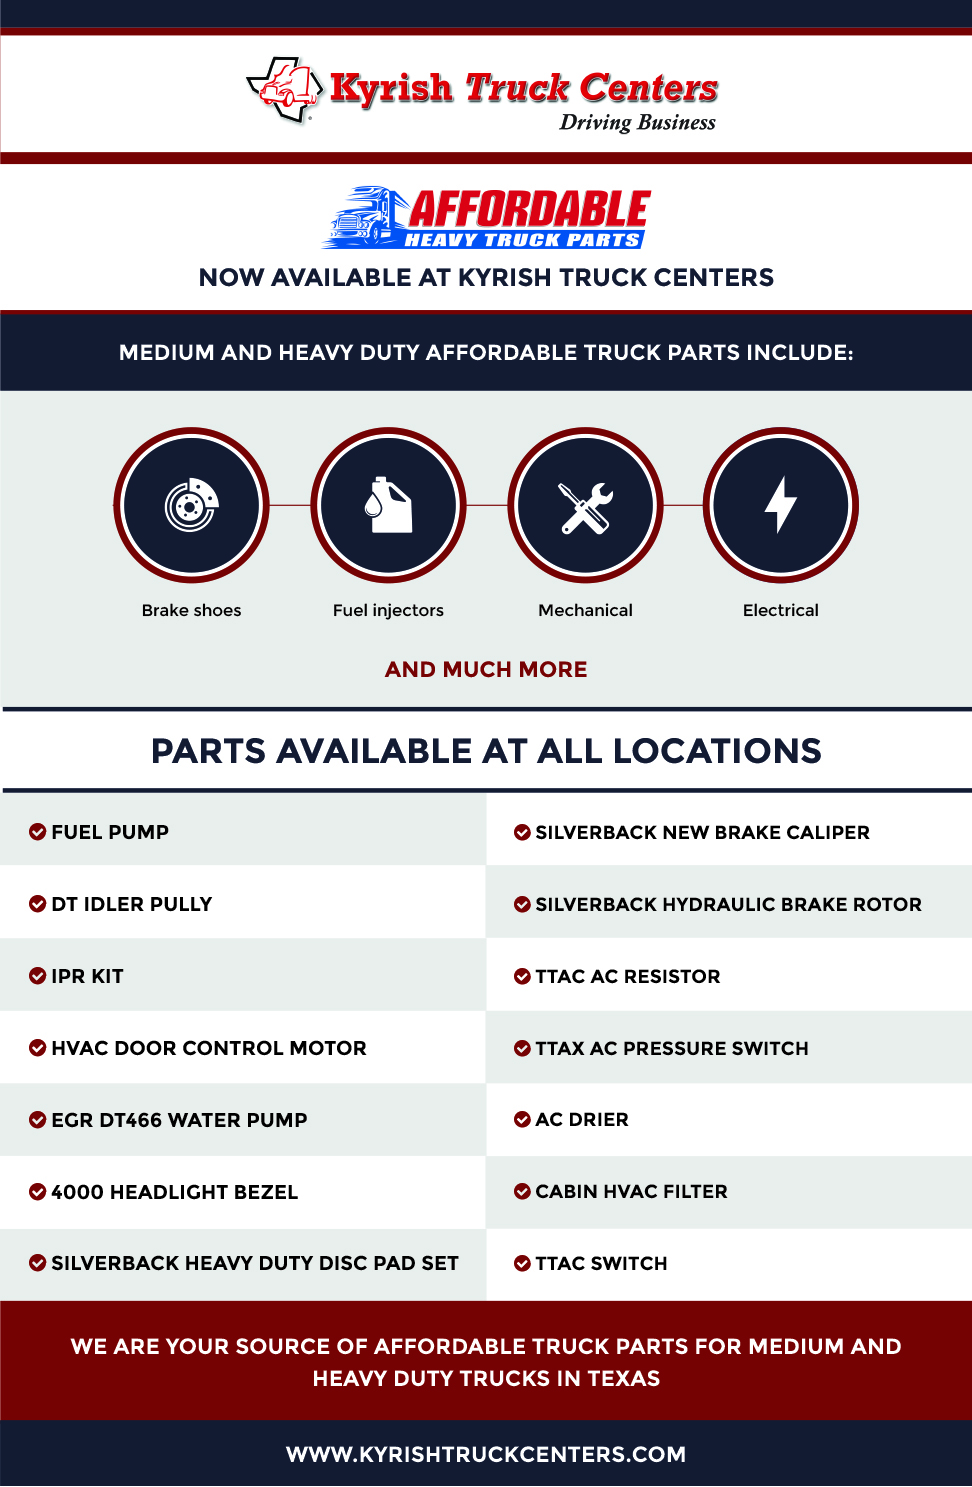 Affordable Truck Parts Offered by Kyrish Truck Centers